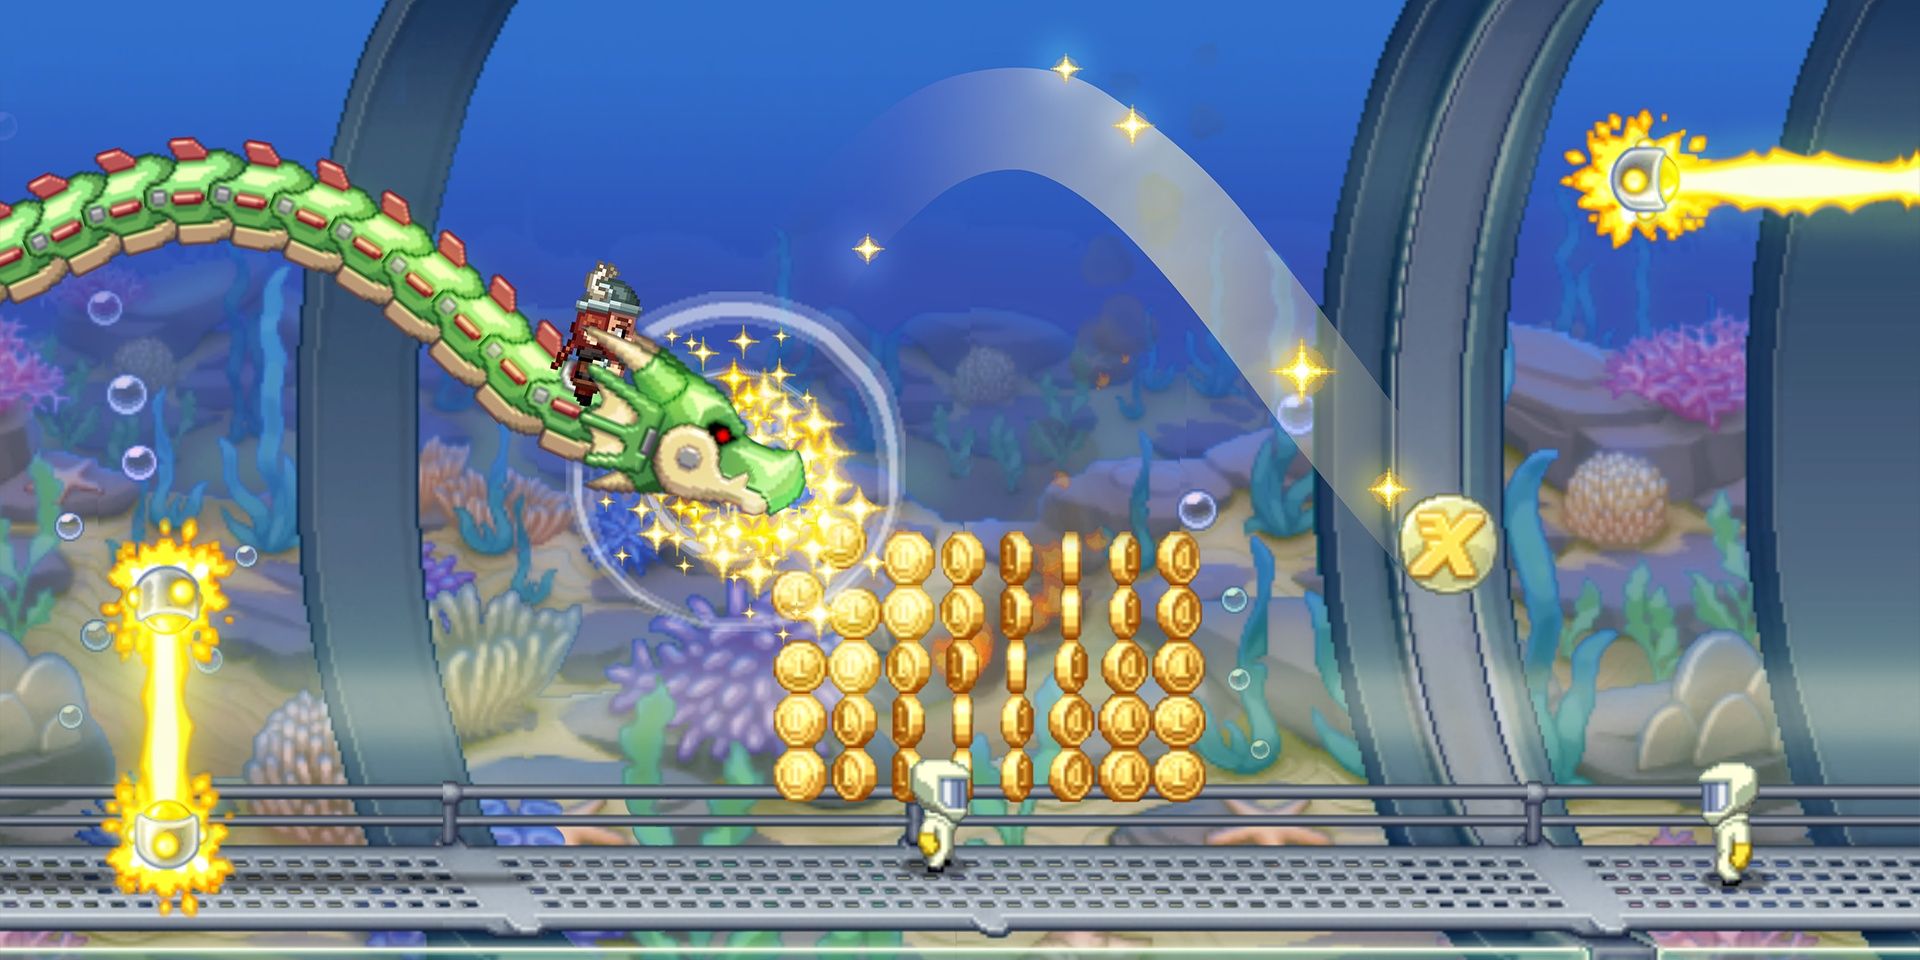 Jetpack Joyride player riding on snake in underwater locale